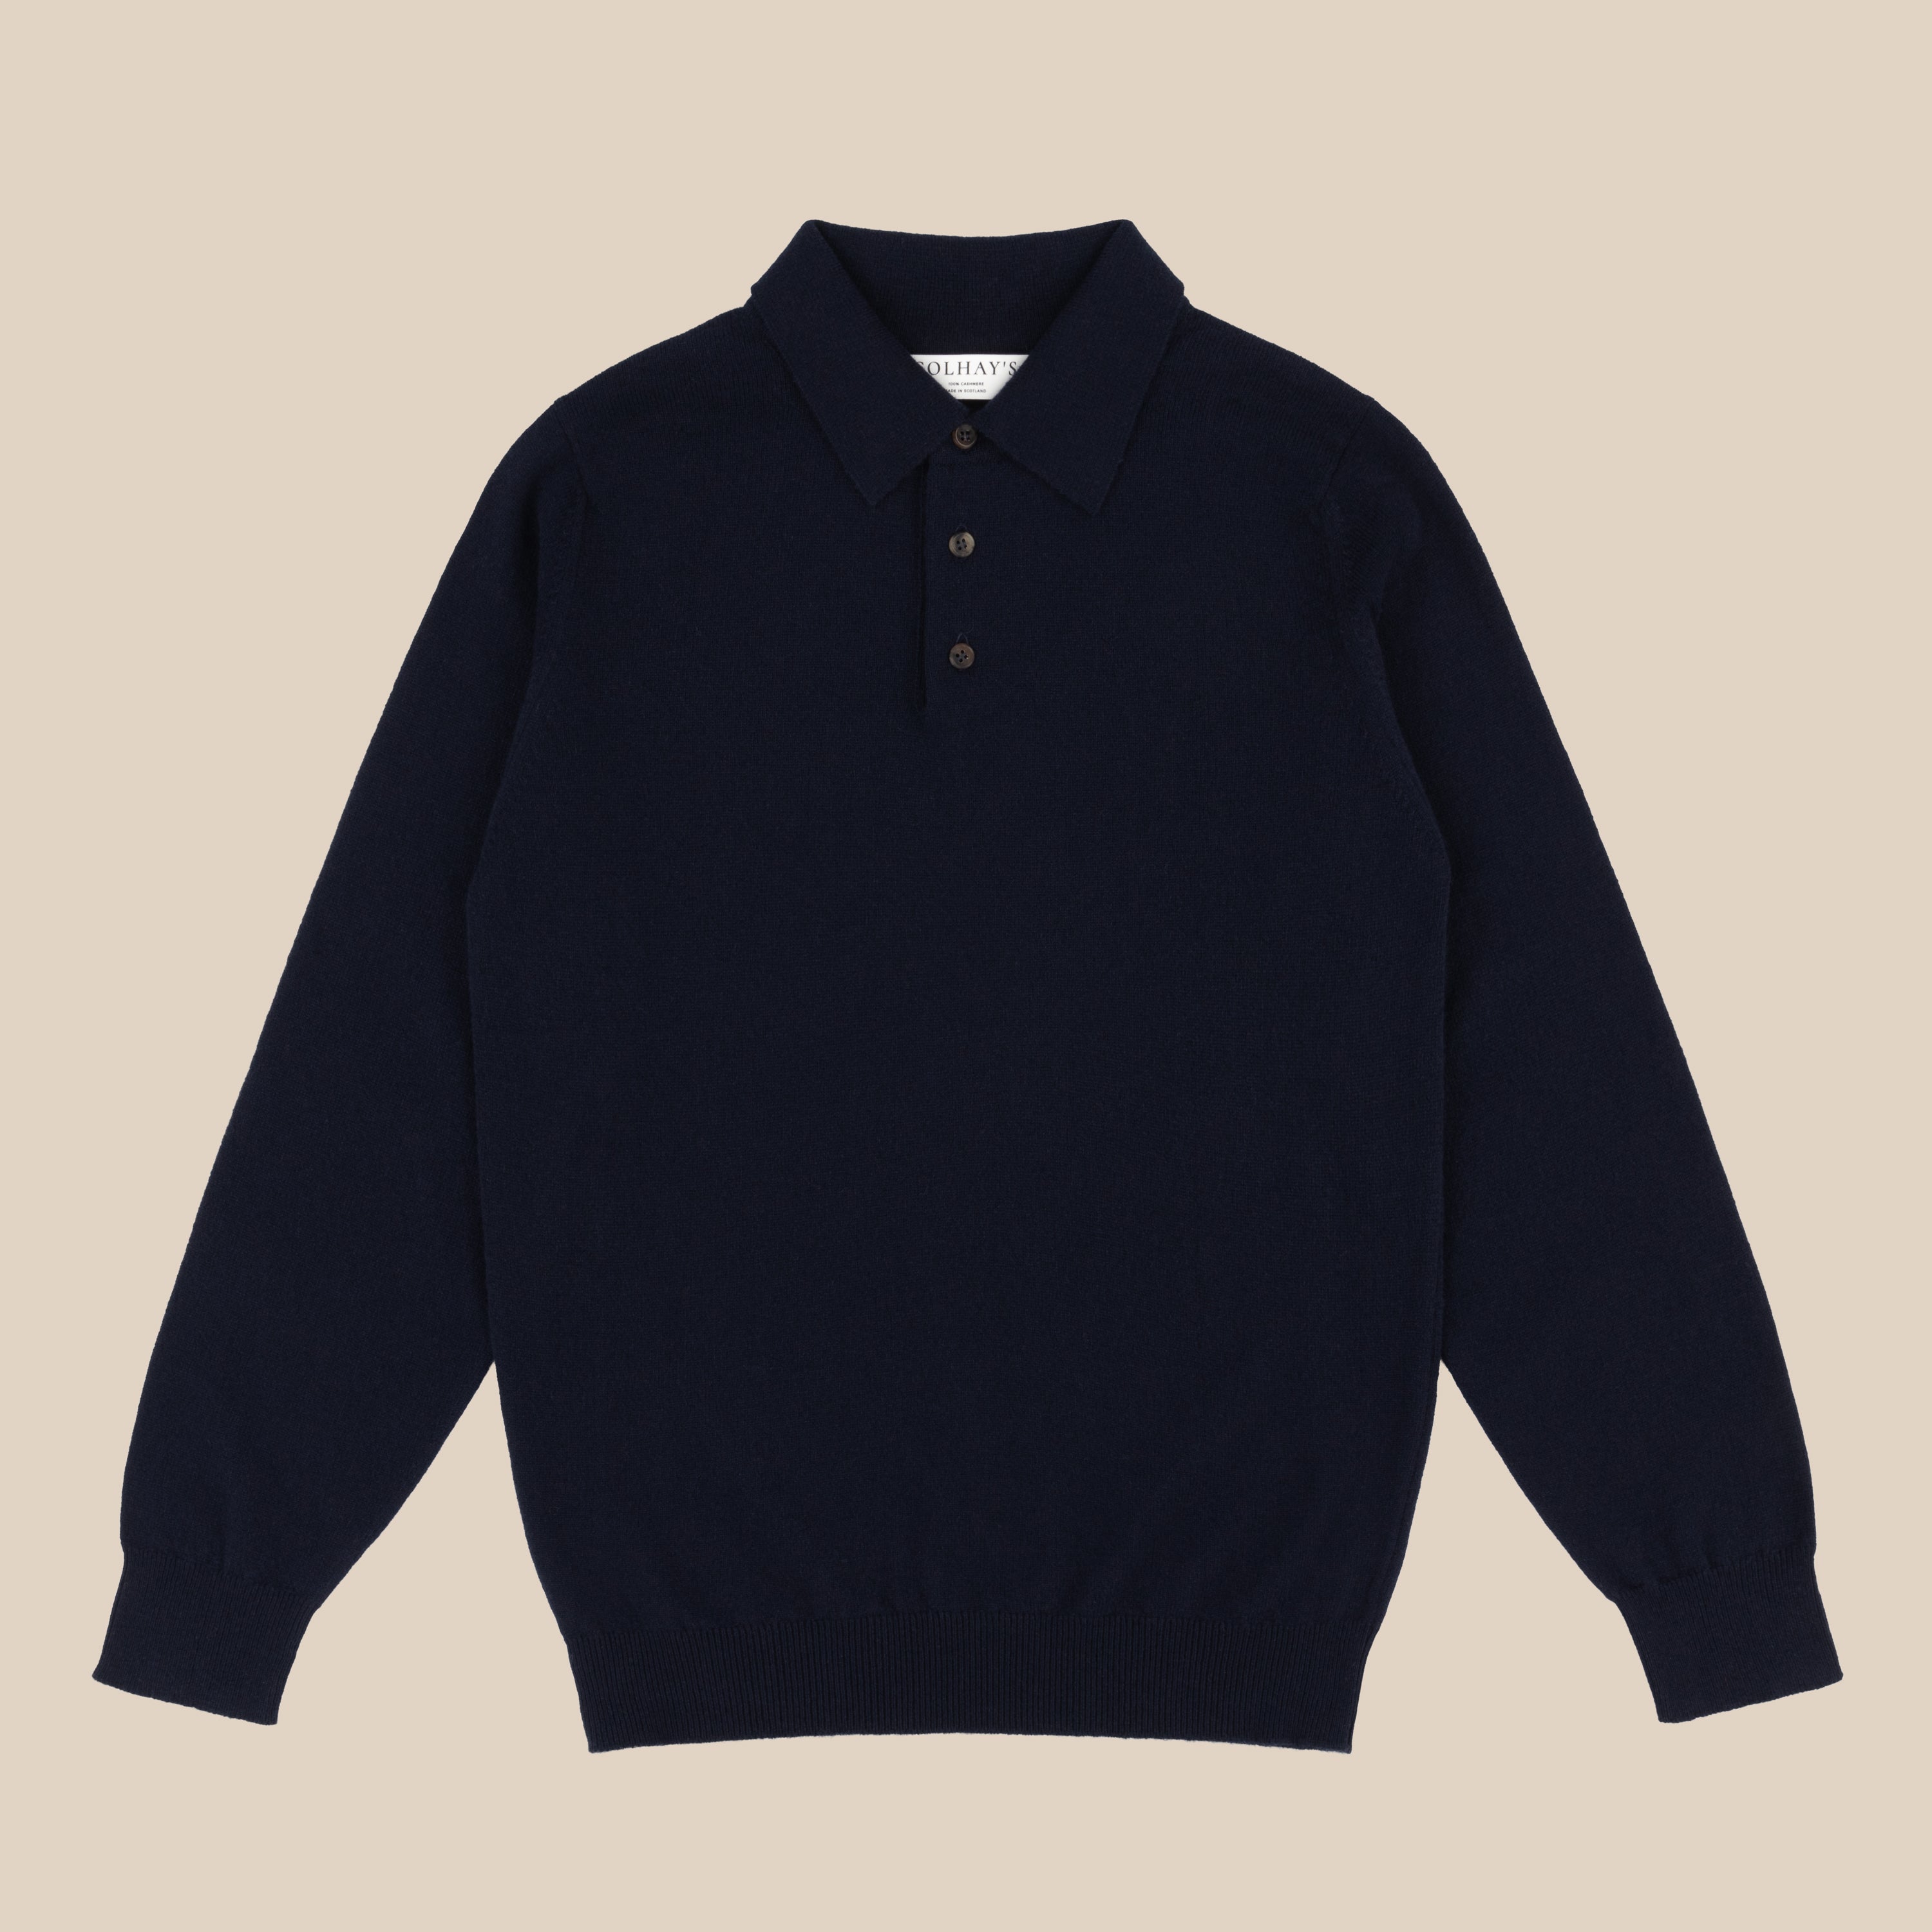 Cashmere polo shirt in navy